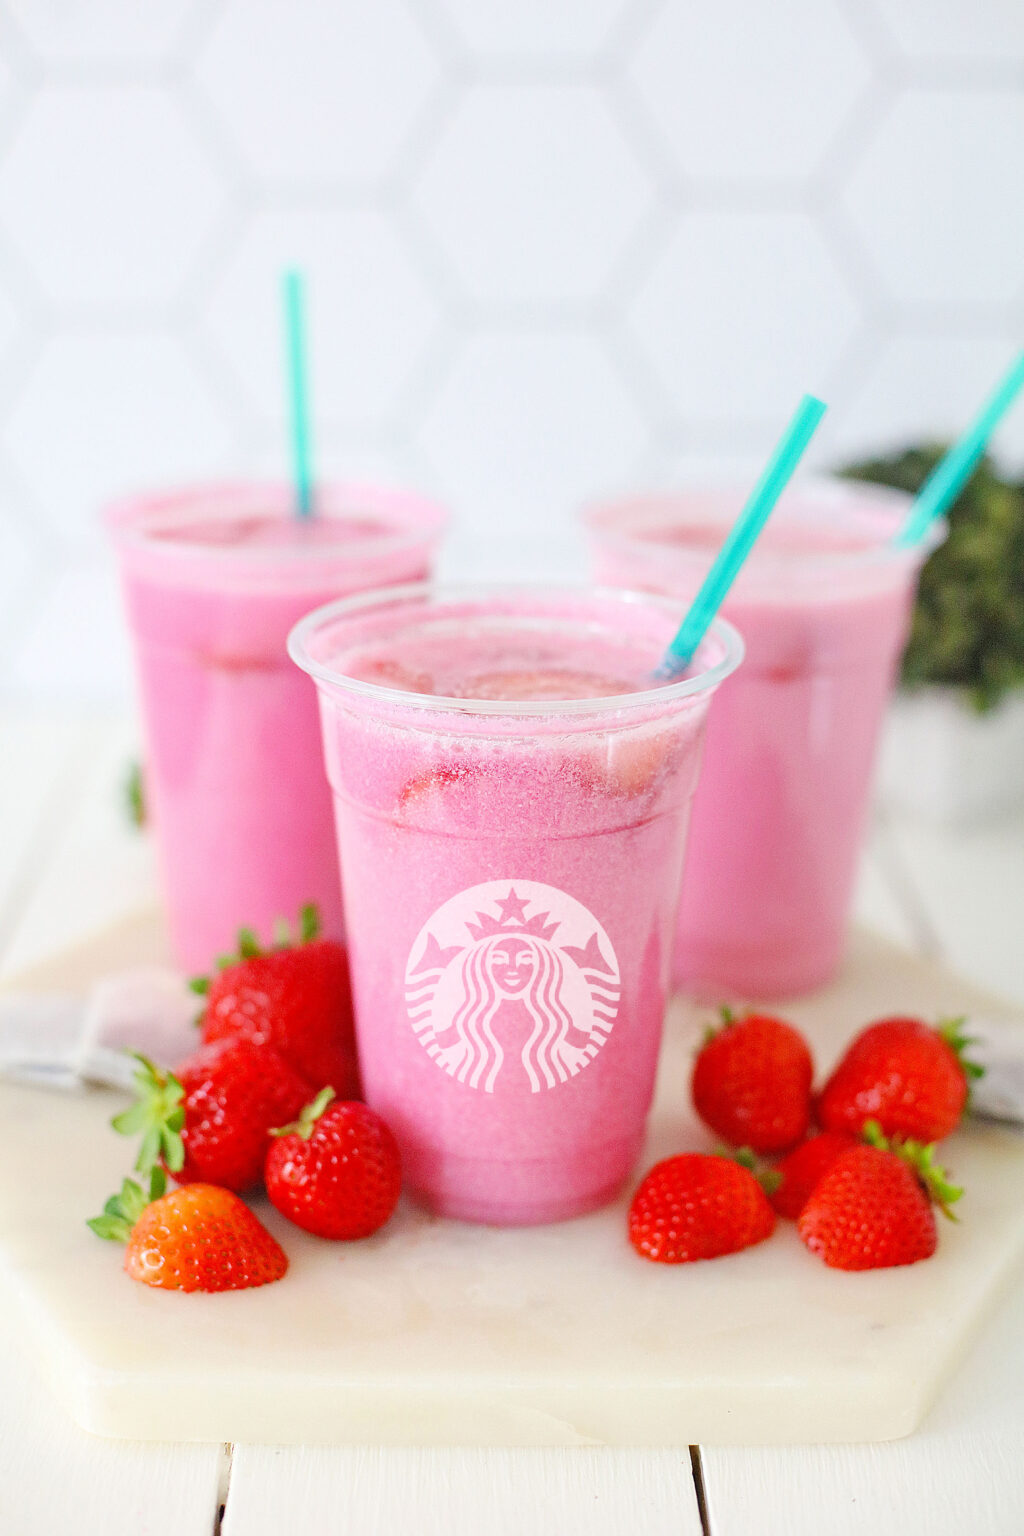 starbucks pink drink in cup with strawberries next to it